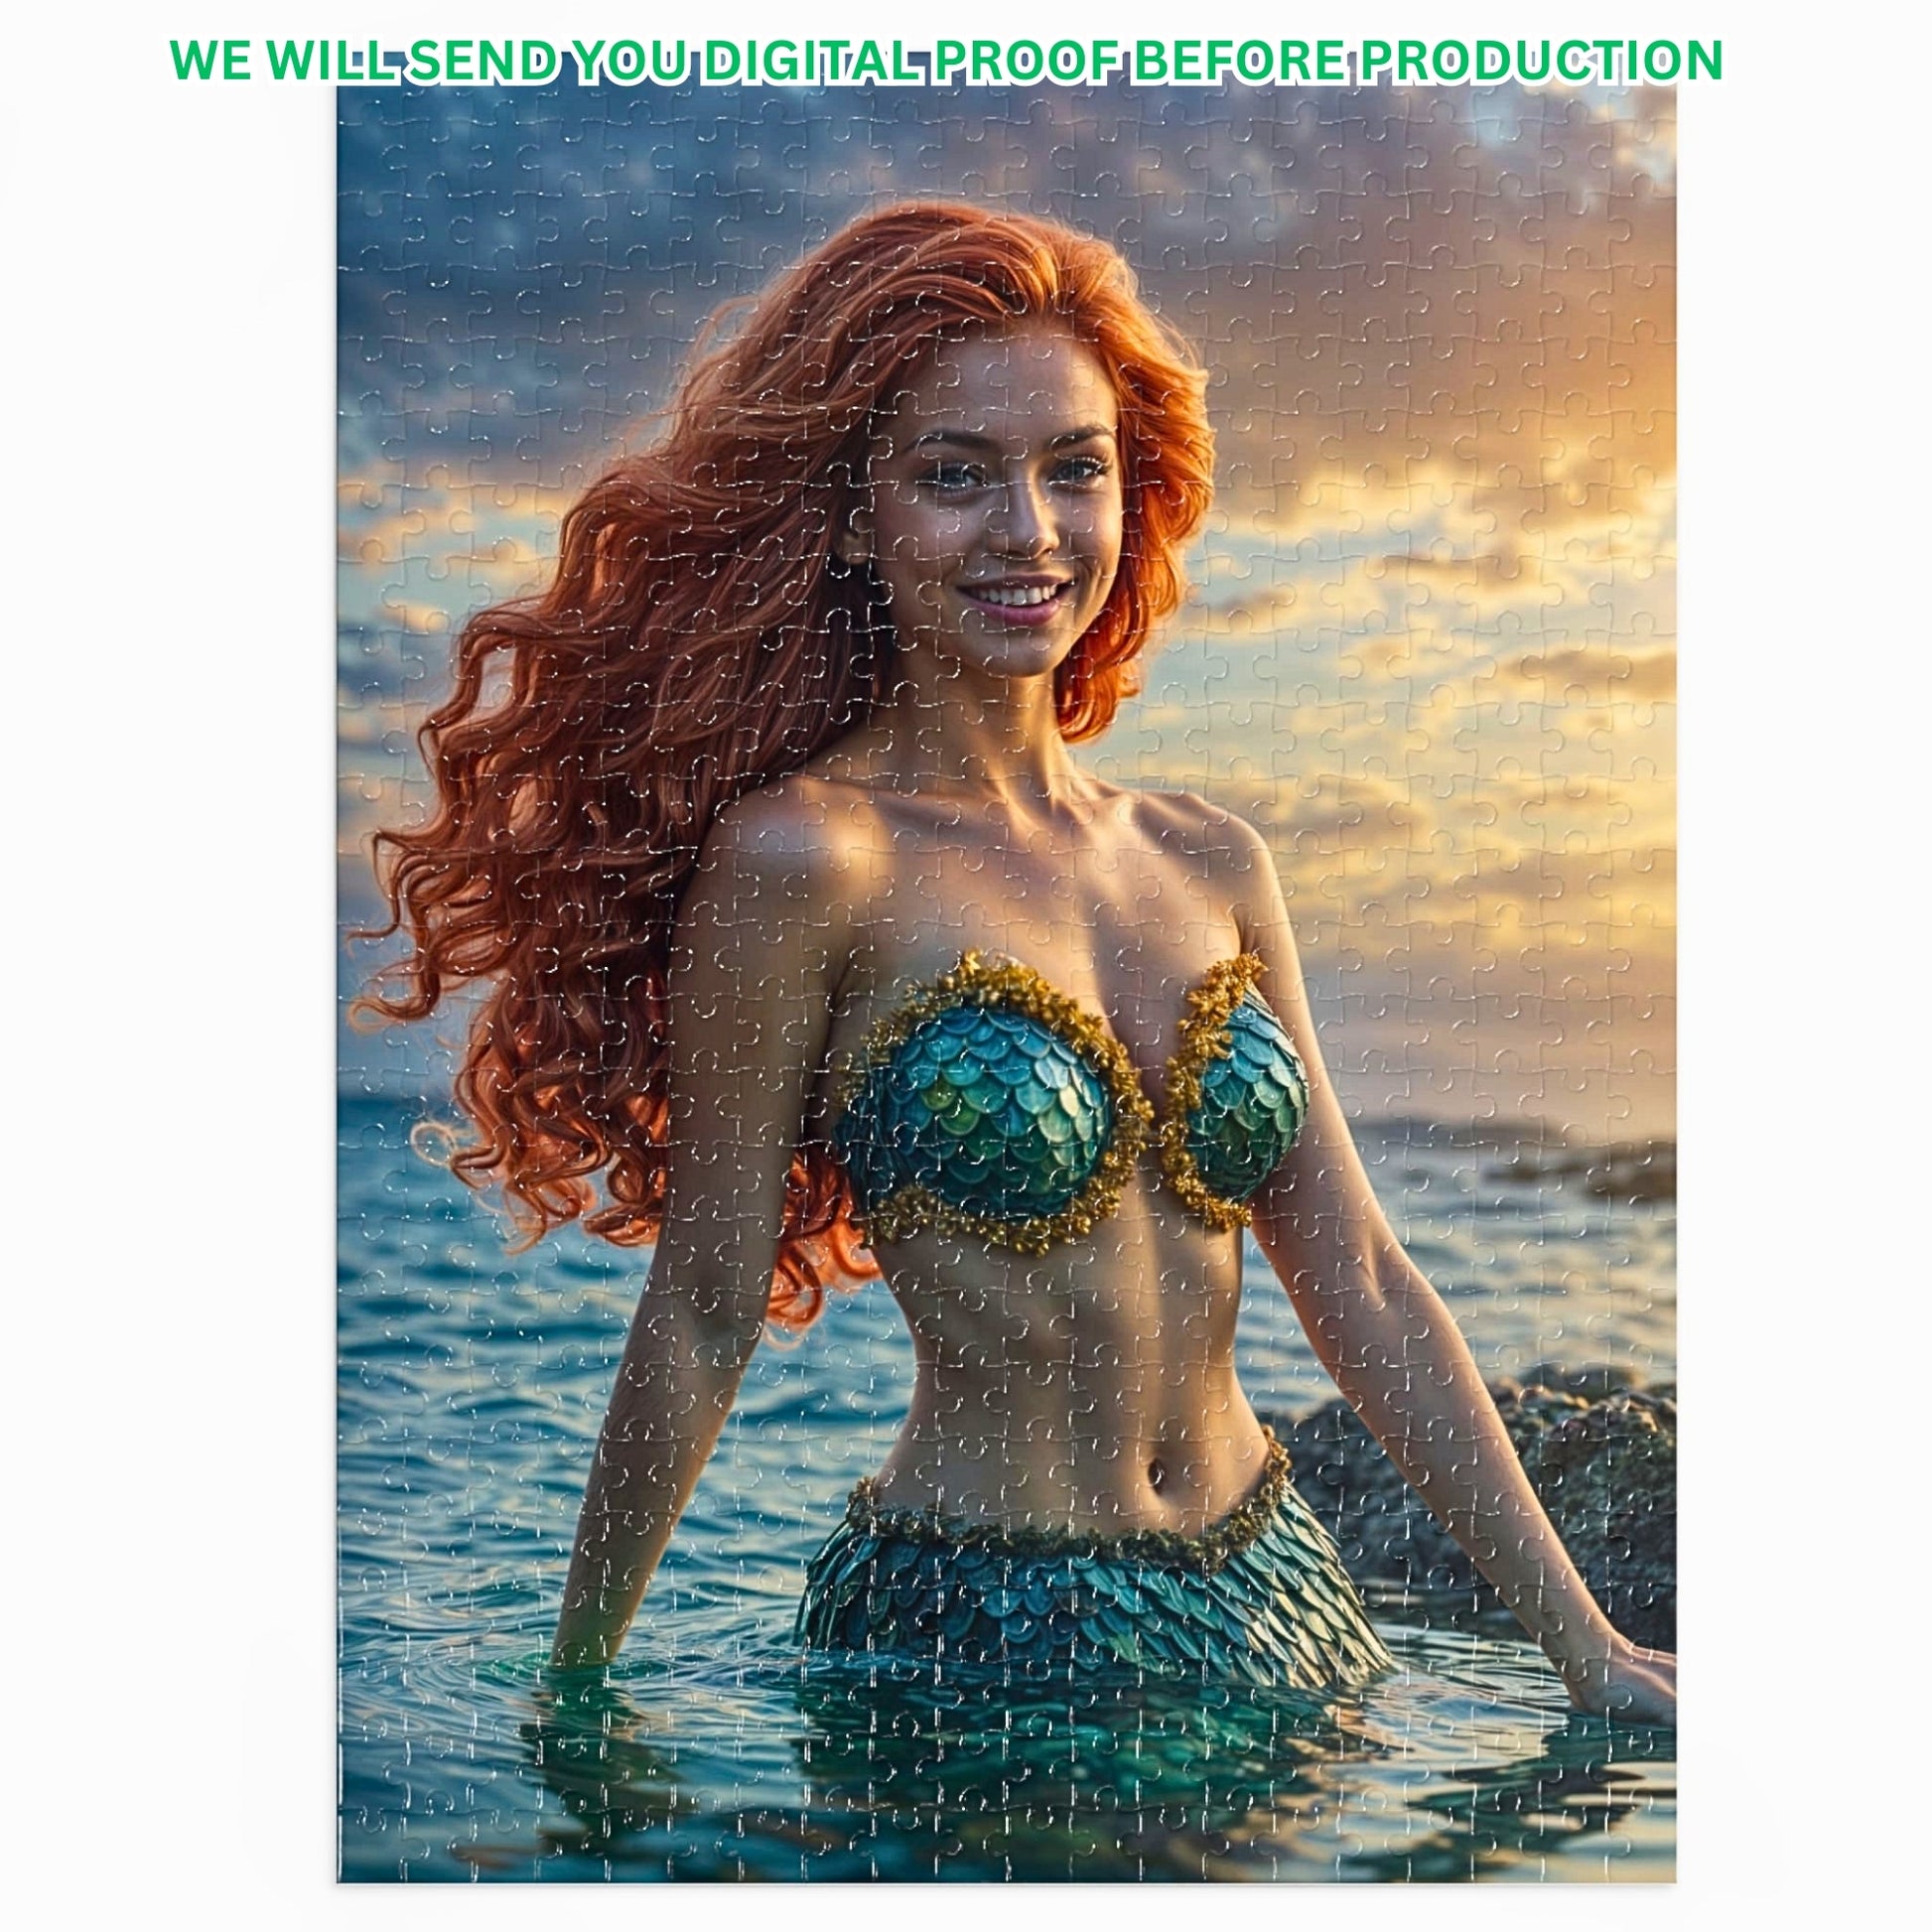 Create your own mermaid puzzle from a cherished photo! Personalize a princess portrait for a memorable birthday gift. Choose from 250 to 1000 pieces. Lady mermaid gifts, princess gifts, and mermaid photo gifts are options. Transform any image into a unique mermaid art puzzle. Perfect for mermaid and princess enthusiasts. Design your custom puzzle today!